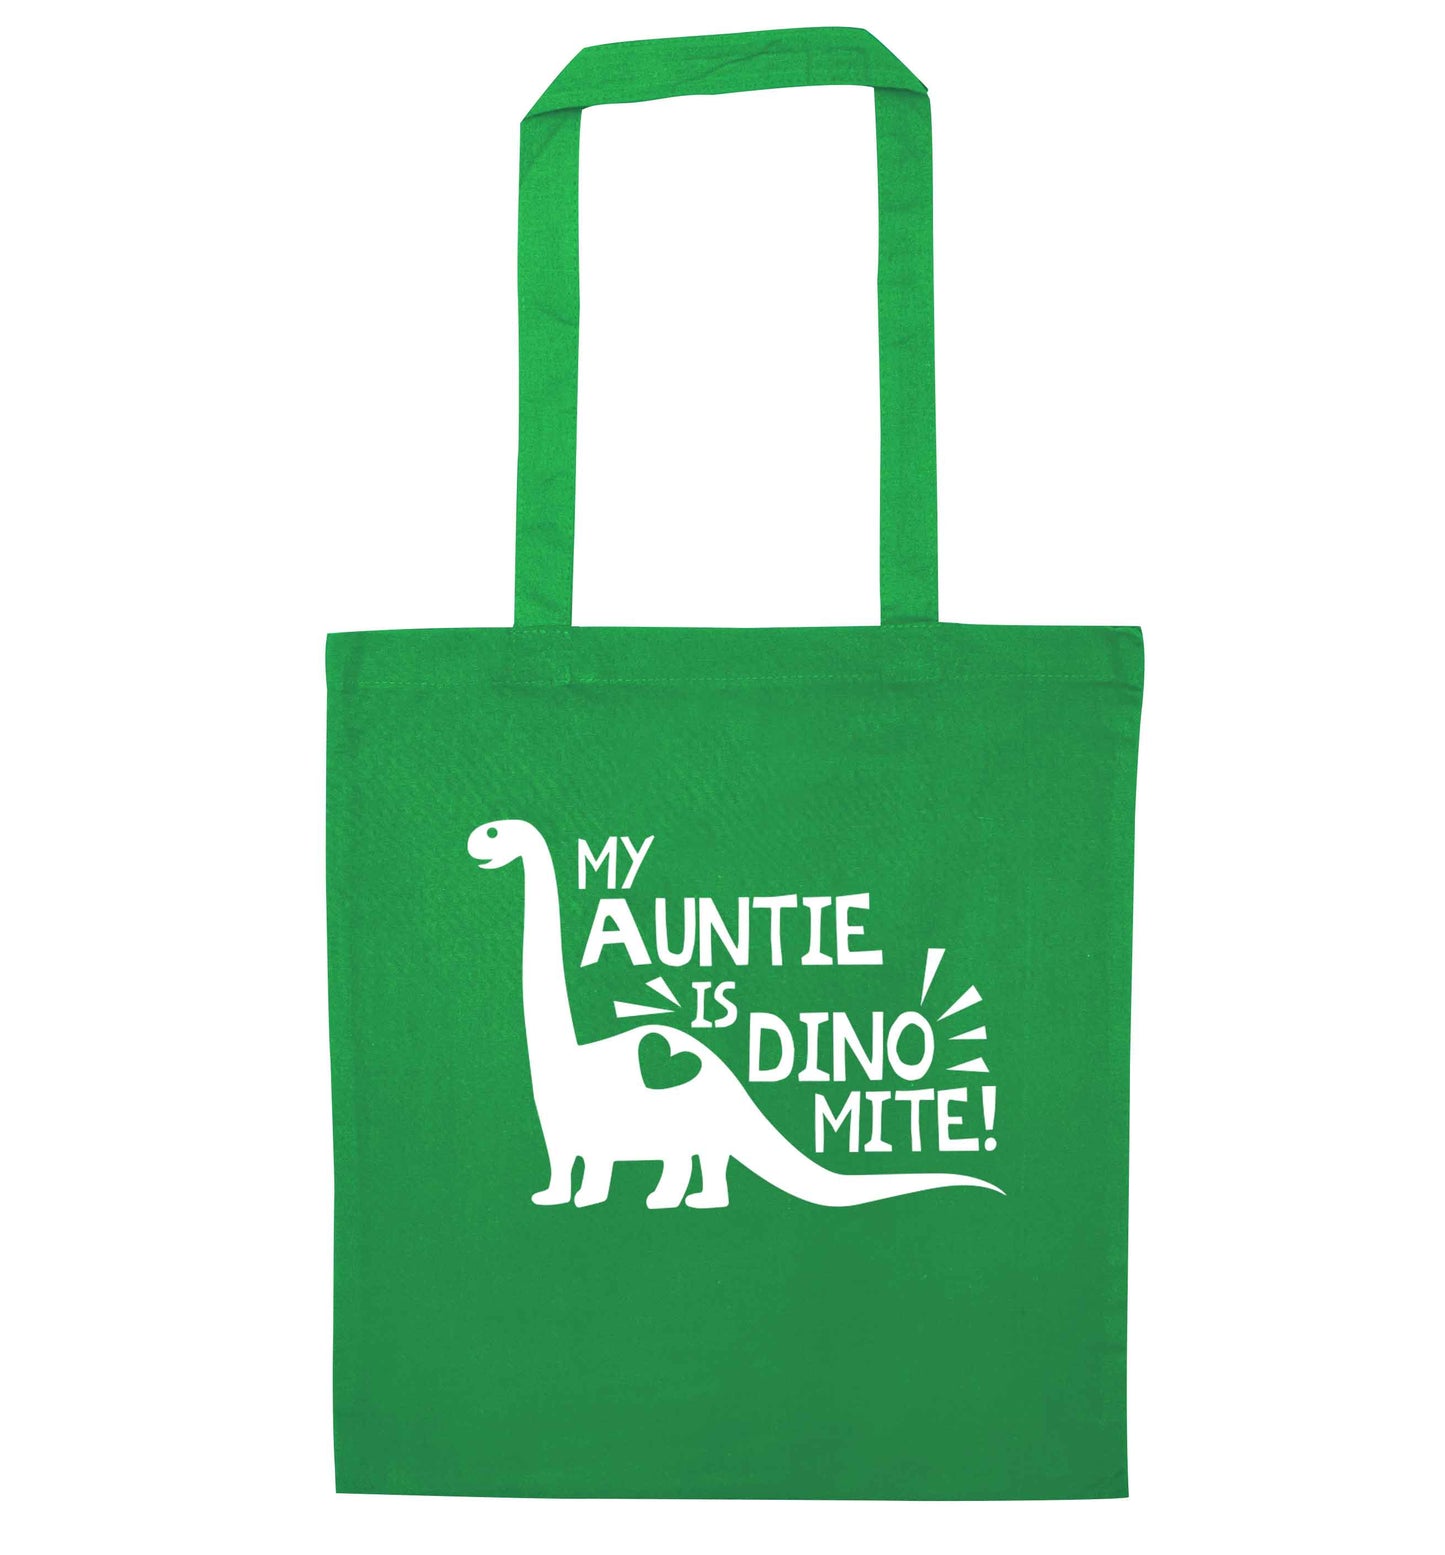 My auntie is dinomite! green tote bag